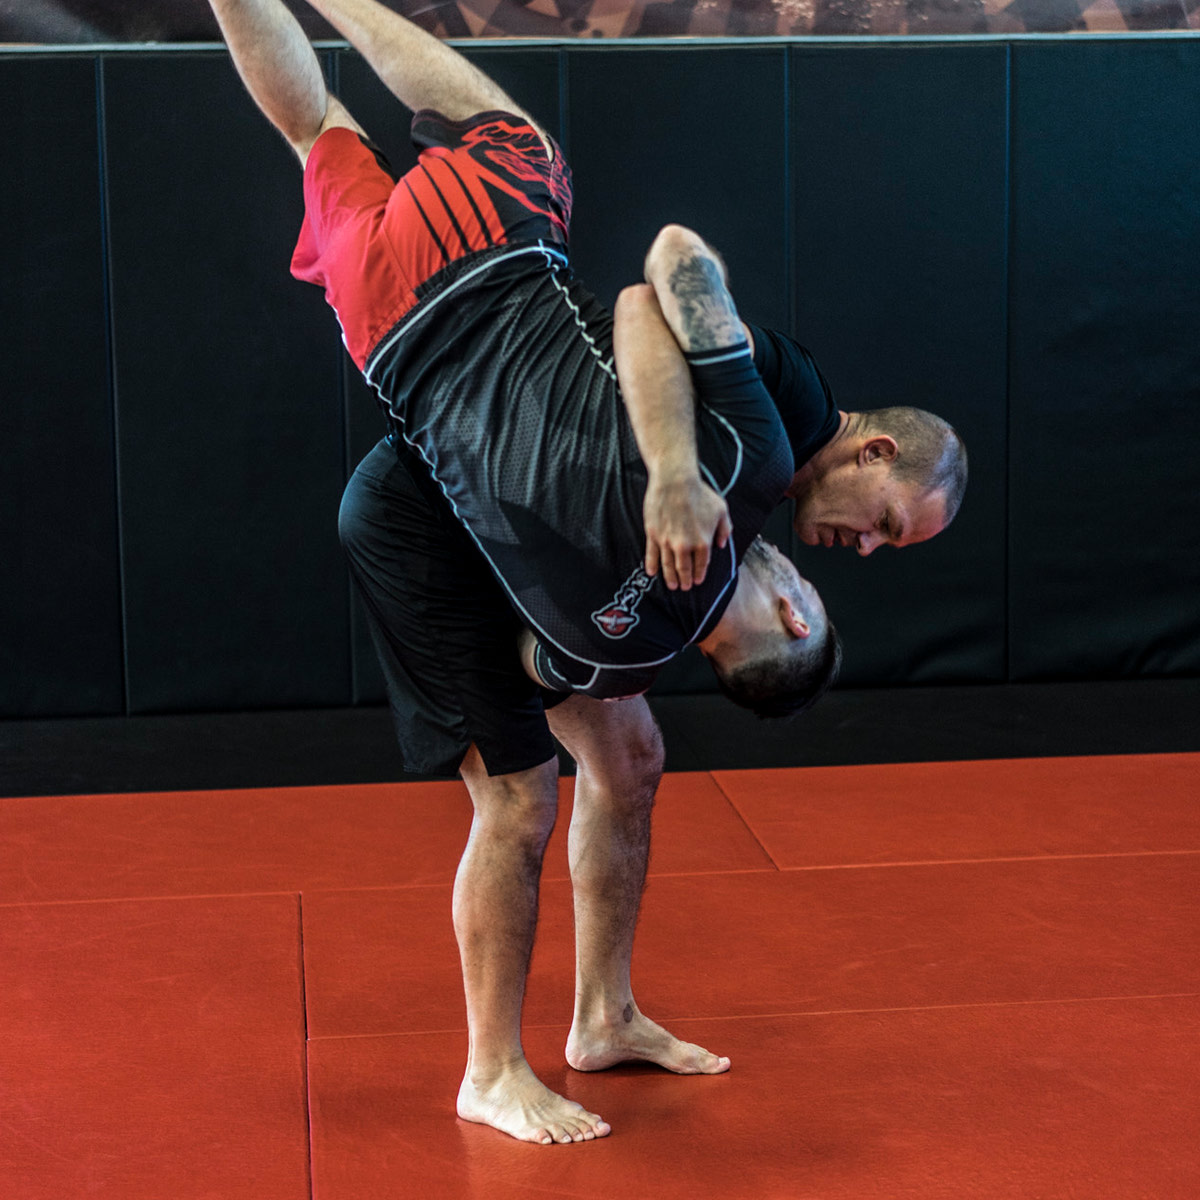 Beginner Submission Grappling